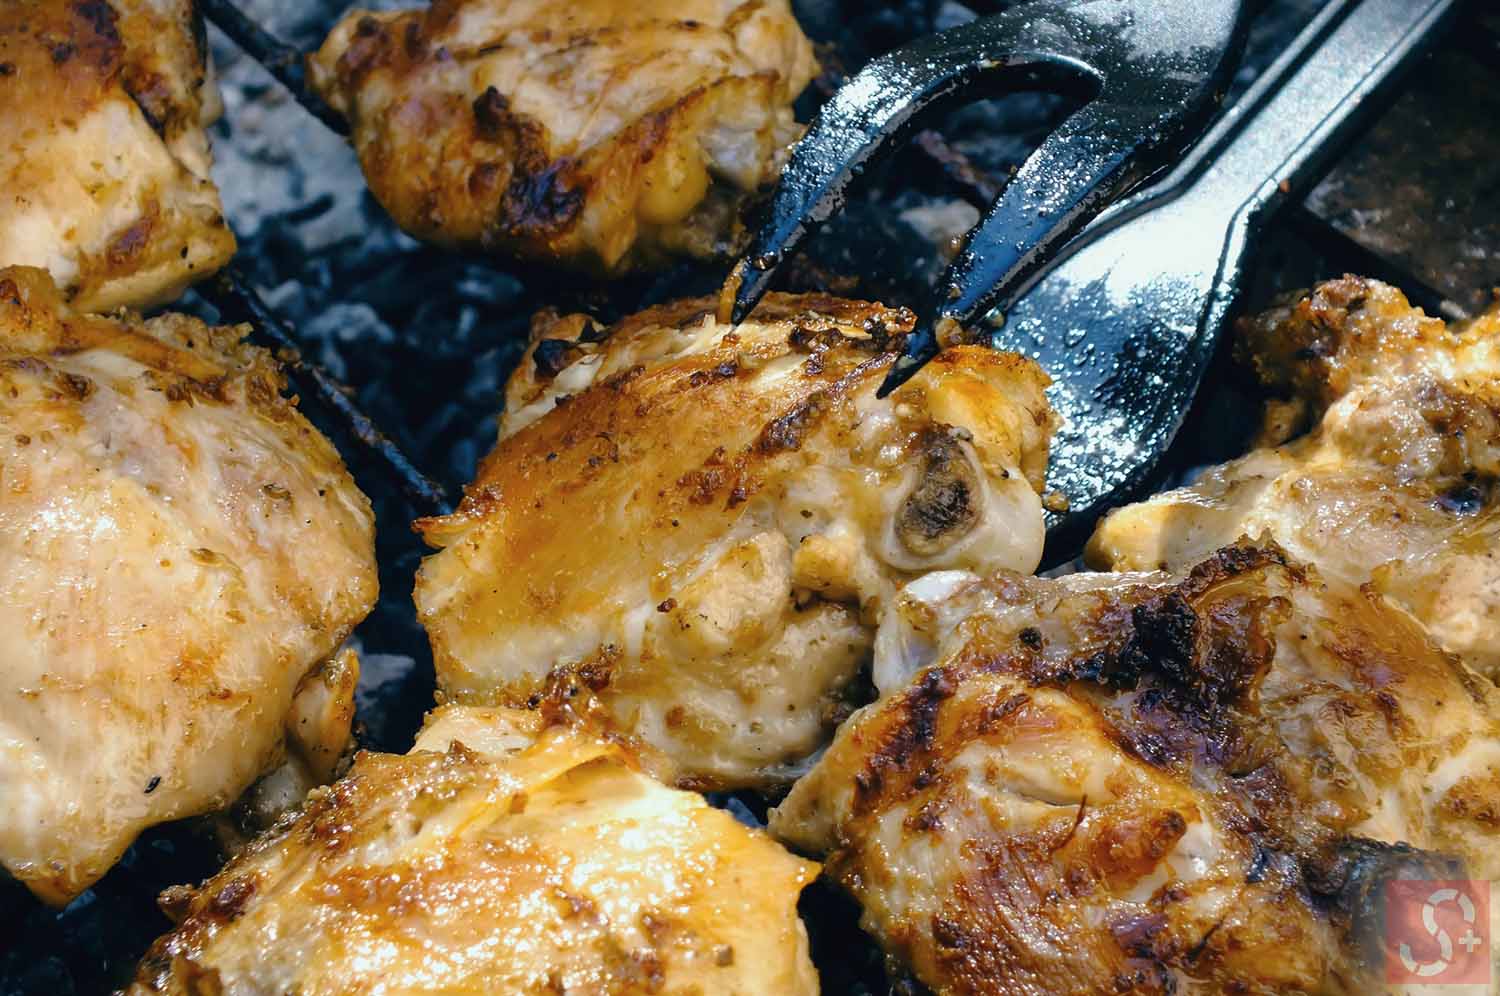 are you a home cook or an aspiring chef wondering what is the white matter when cooking chicken?